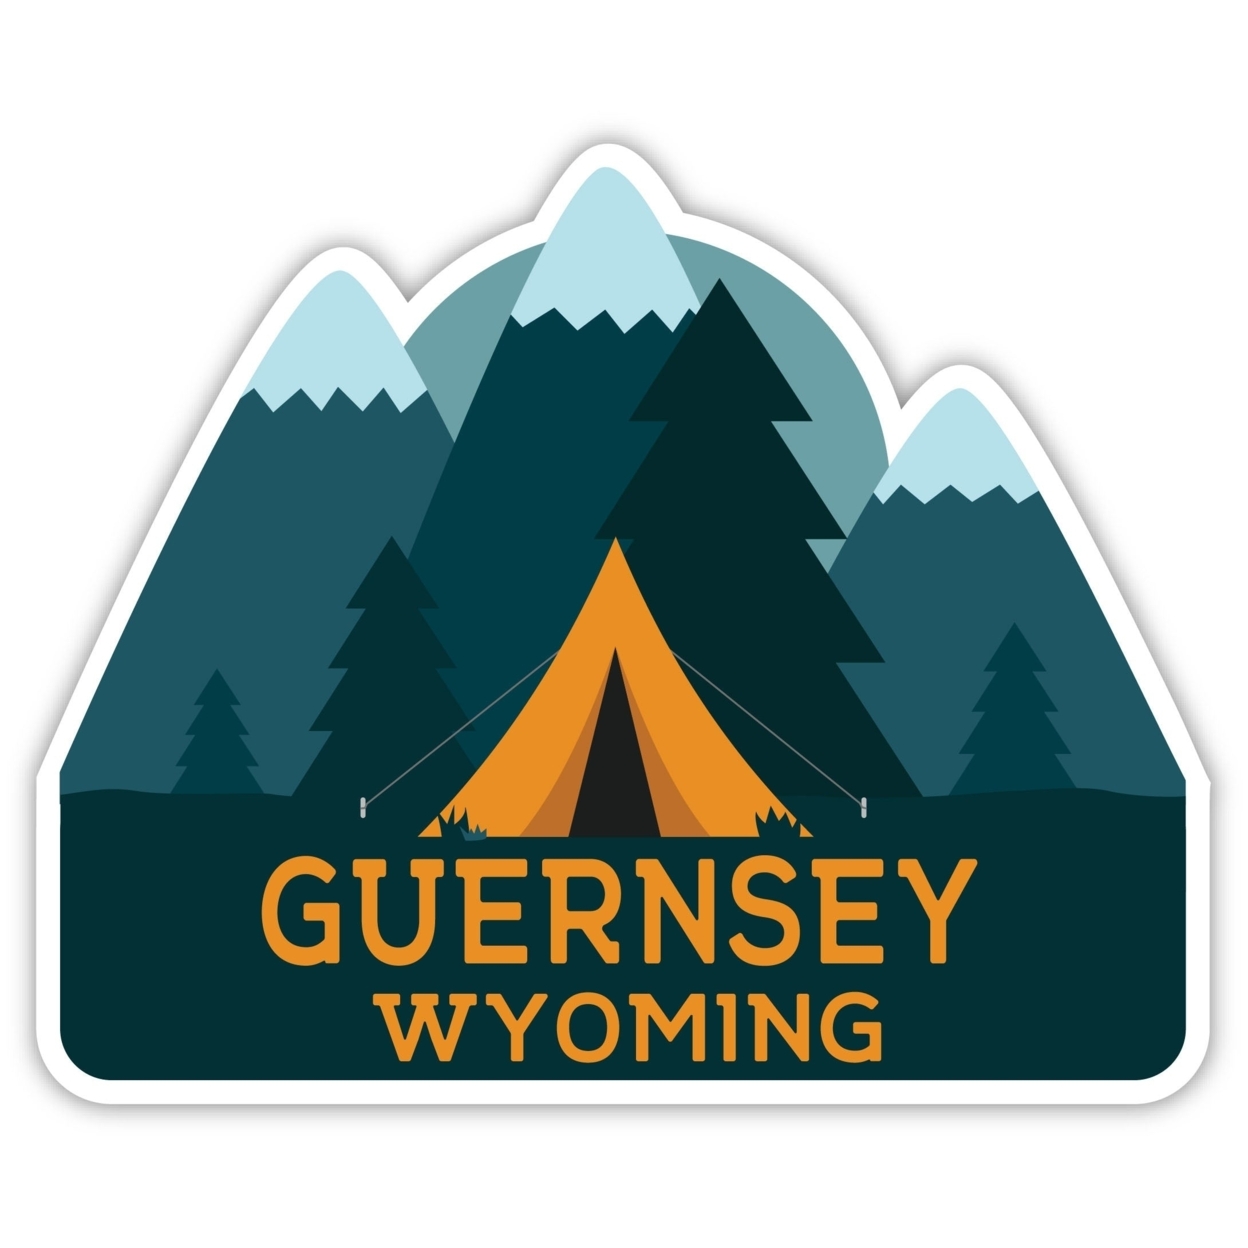 Guernsey Wyoming Souvenir Decorative Stickers (Choose Theme And Size) - Single Unit, 12-Inch, Tent